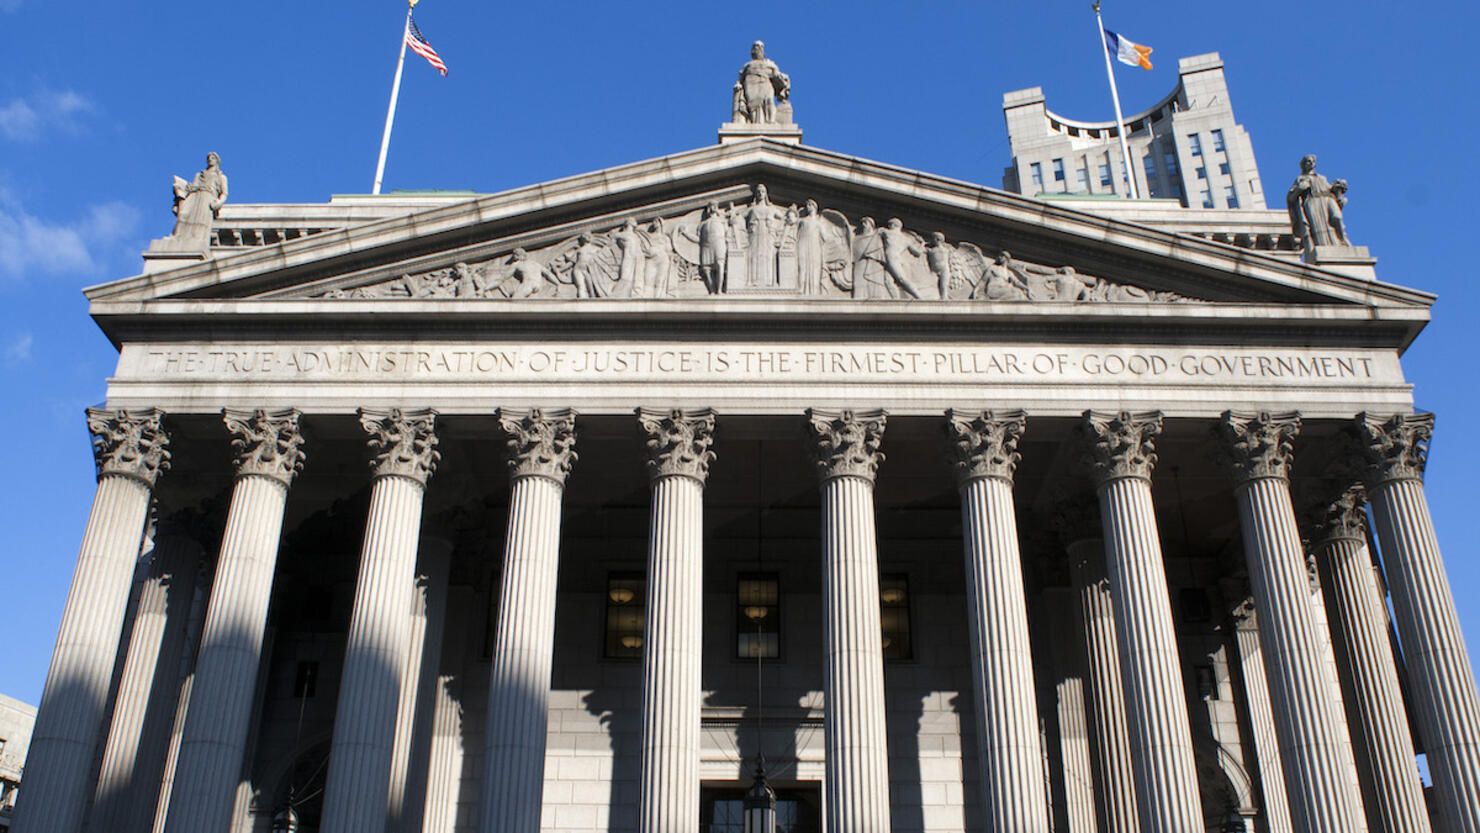 New York State Supreme Court building in Lower Manhattan showing the words 'The True Administration of Justice' on its facade in Manhattan.